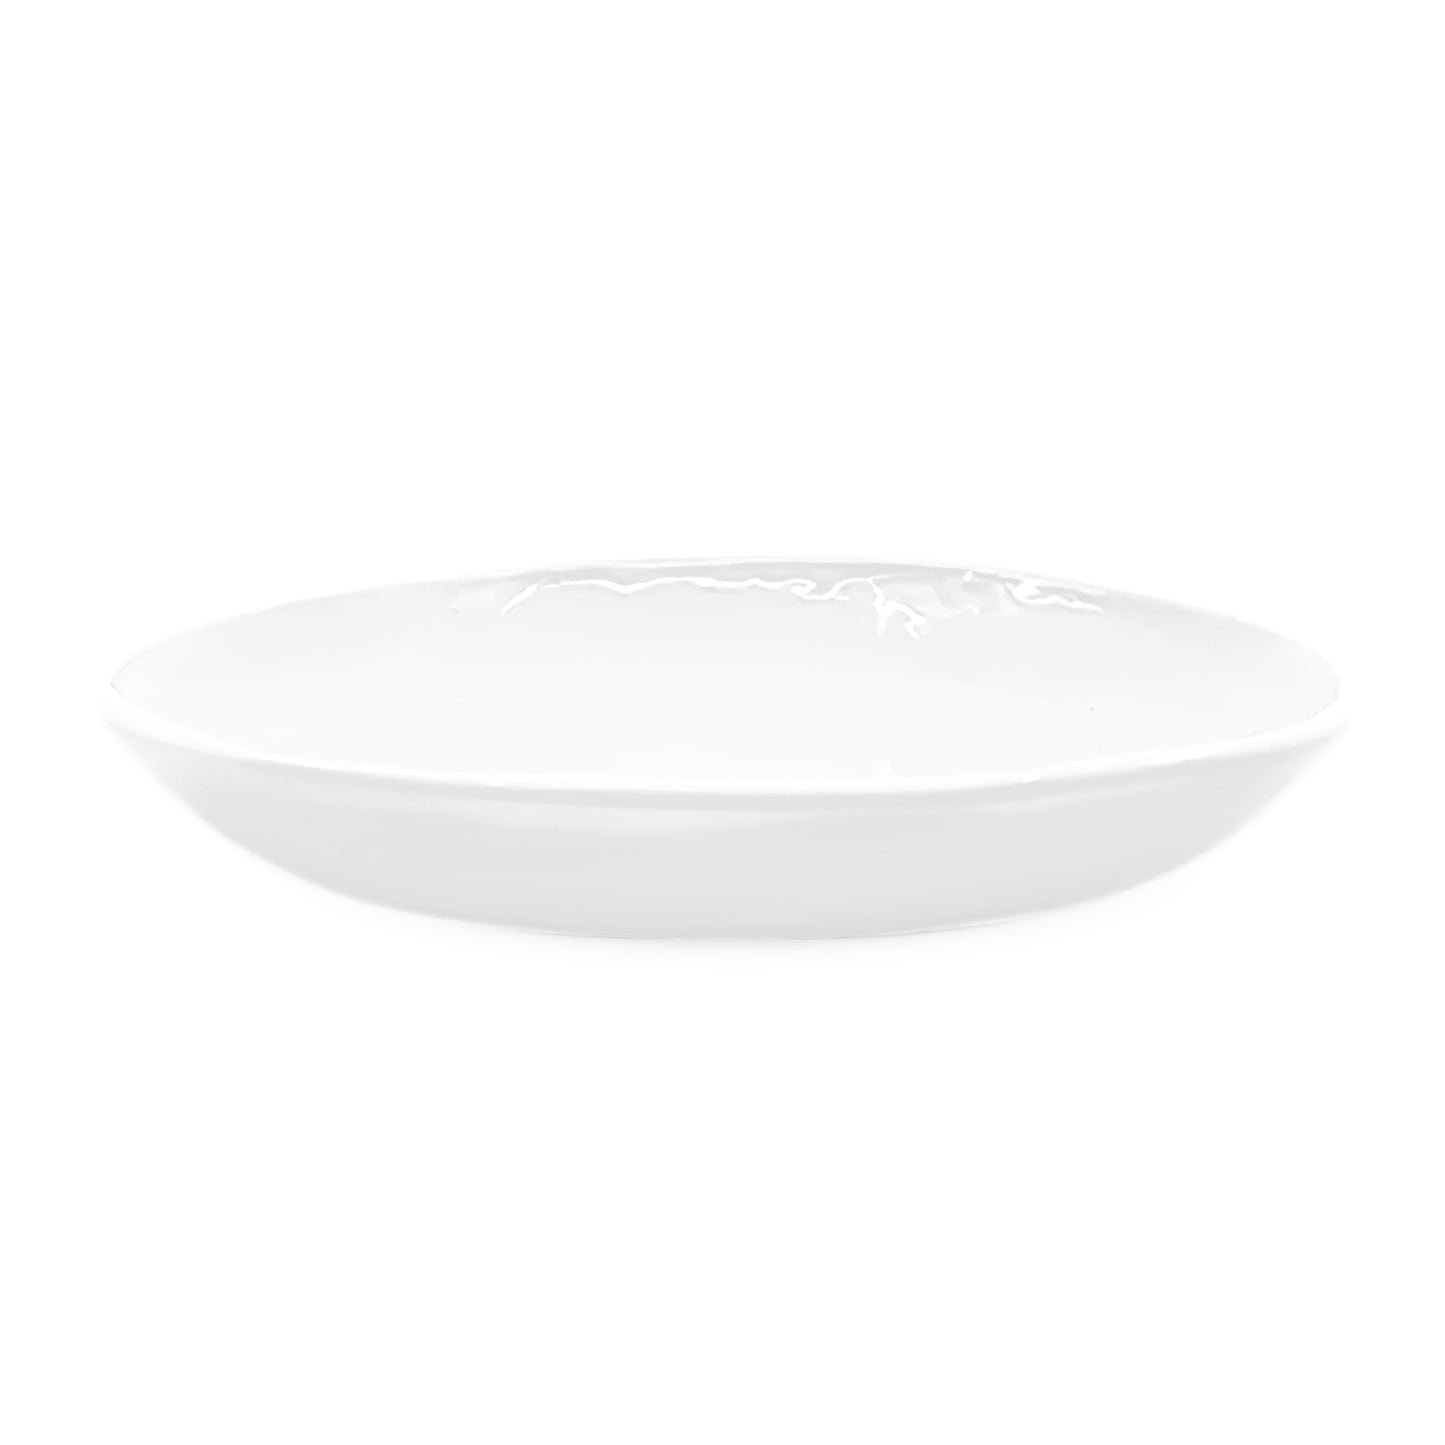 PEASANT PLATE LARGE WHITE GLOSS